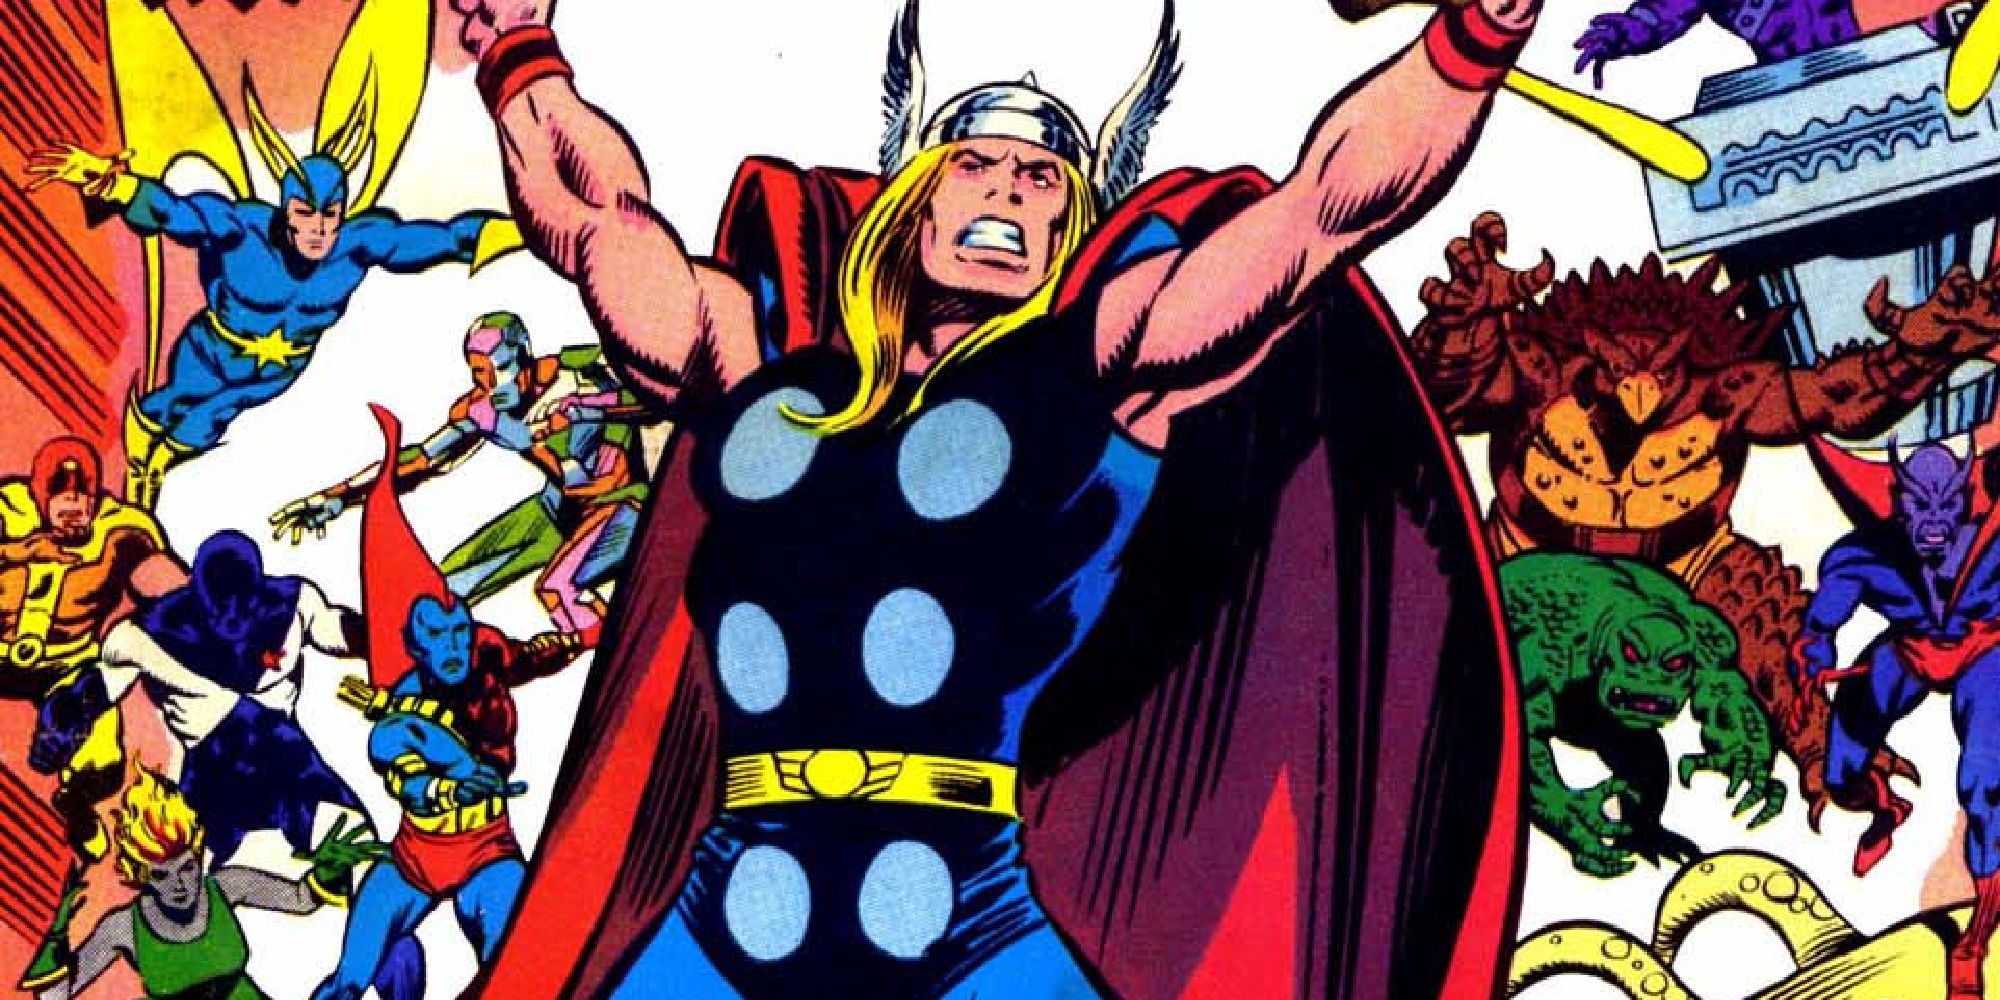 Thor teams with Guardians of the Galaxy in Marvel Comics.